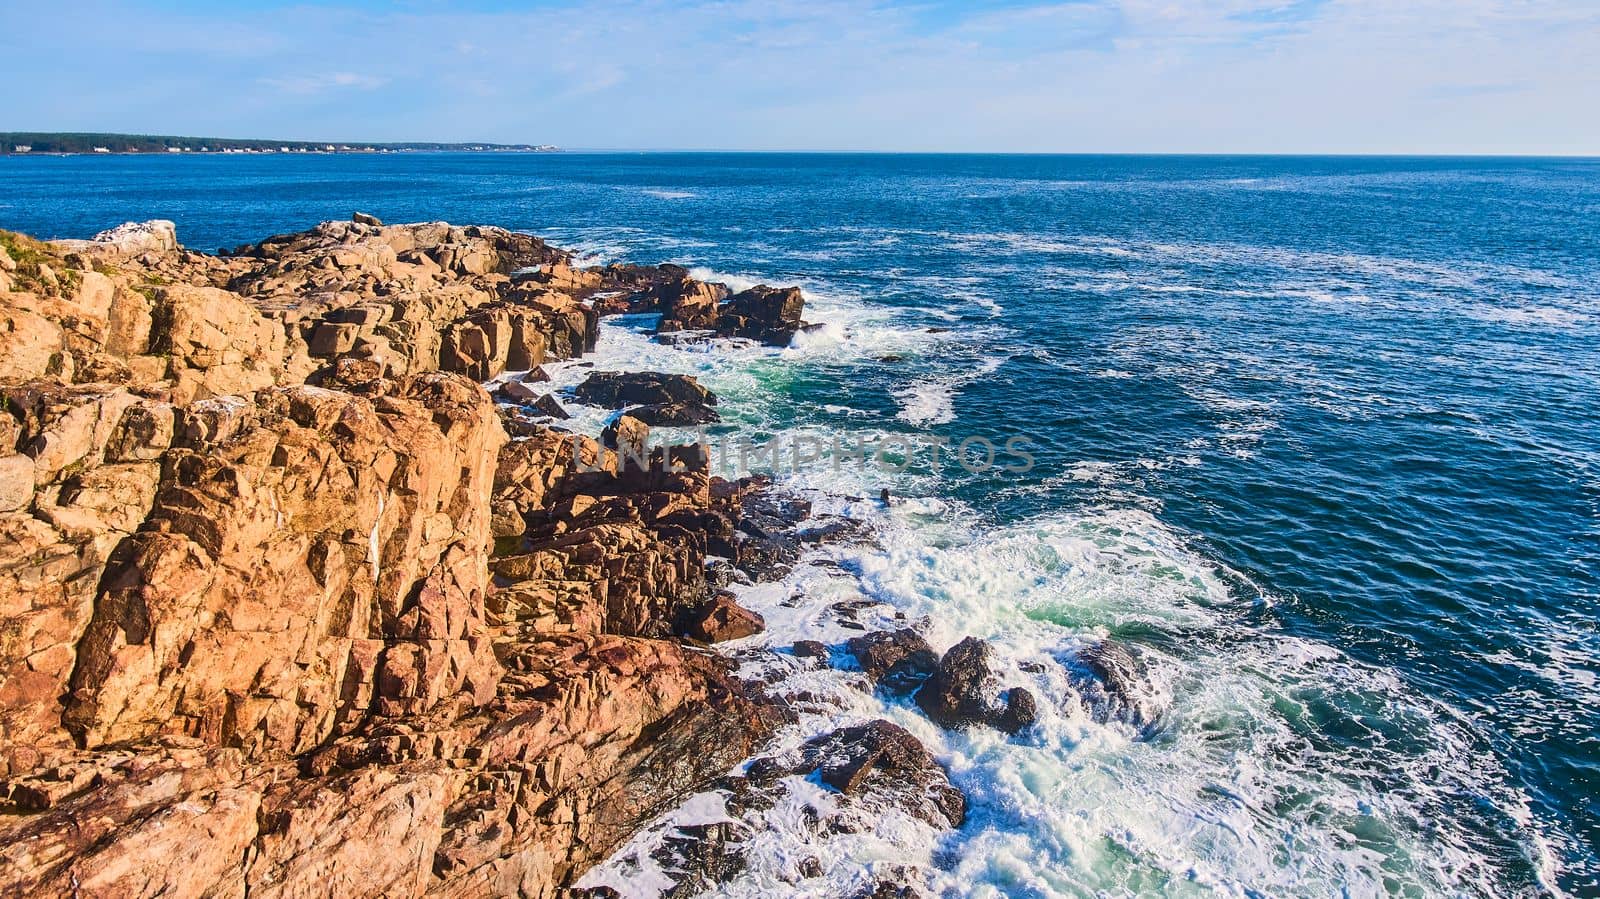 Cliffs of ocean in Maine with waves crashing over boulders by njproductions